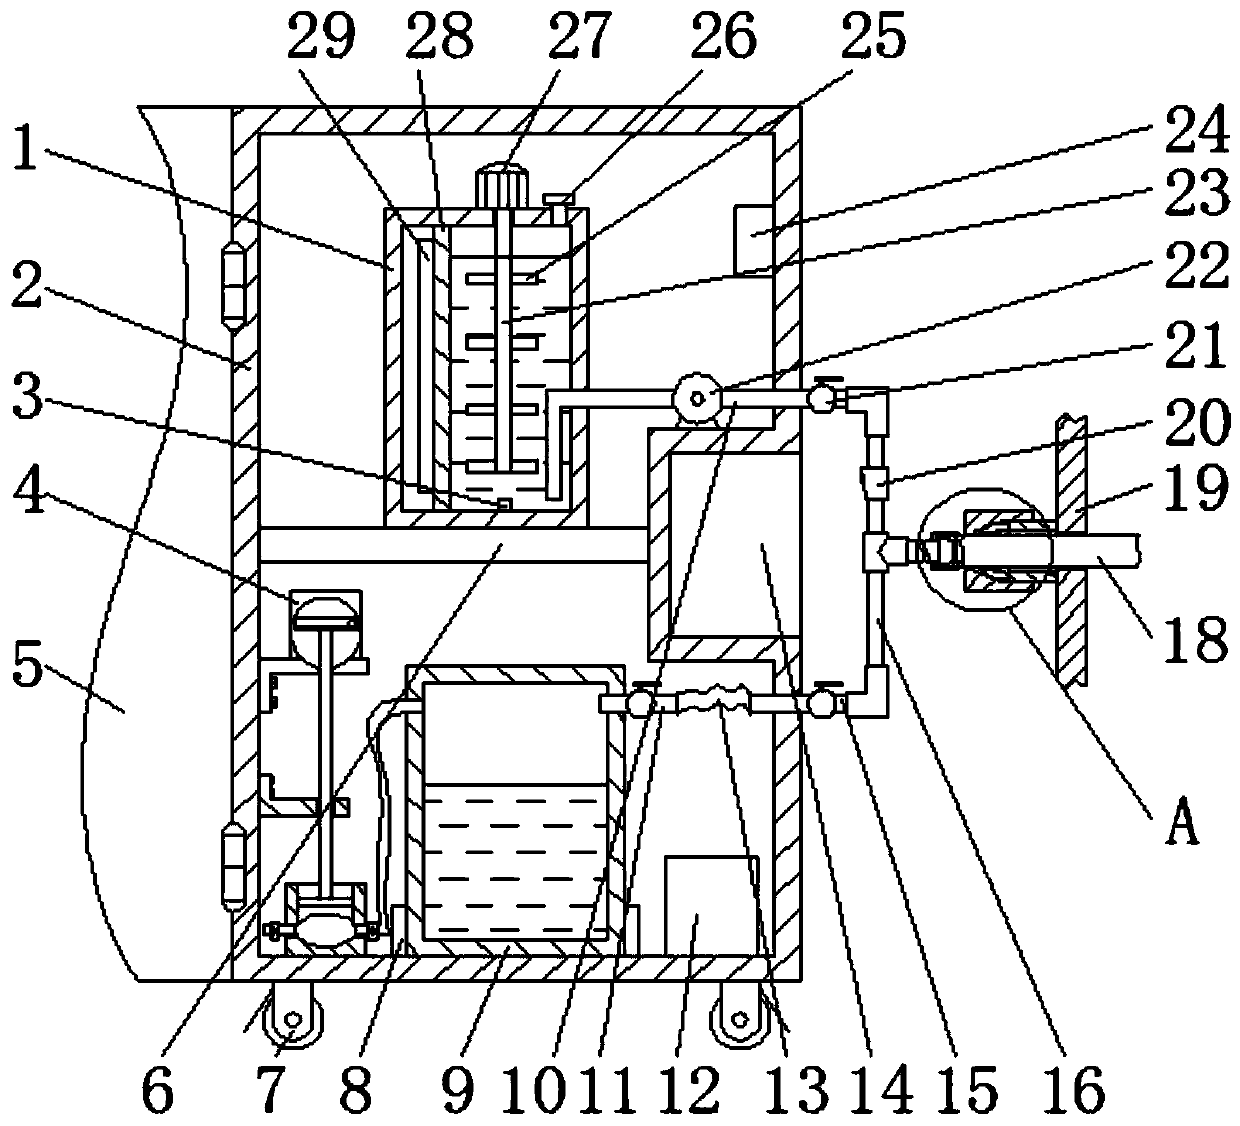 Clinical flushing device and method for urinary surgery